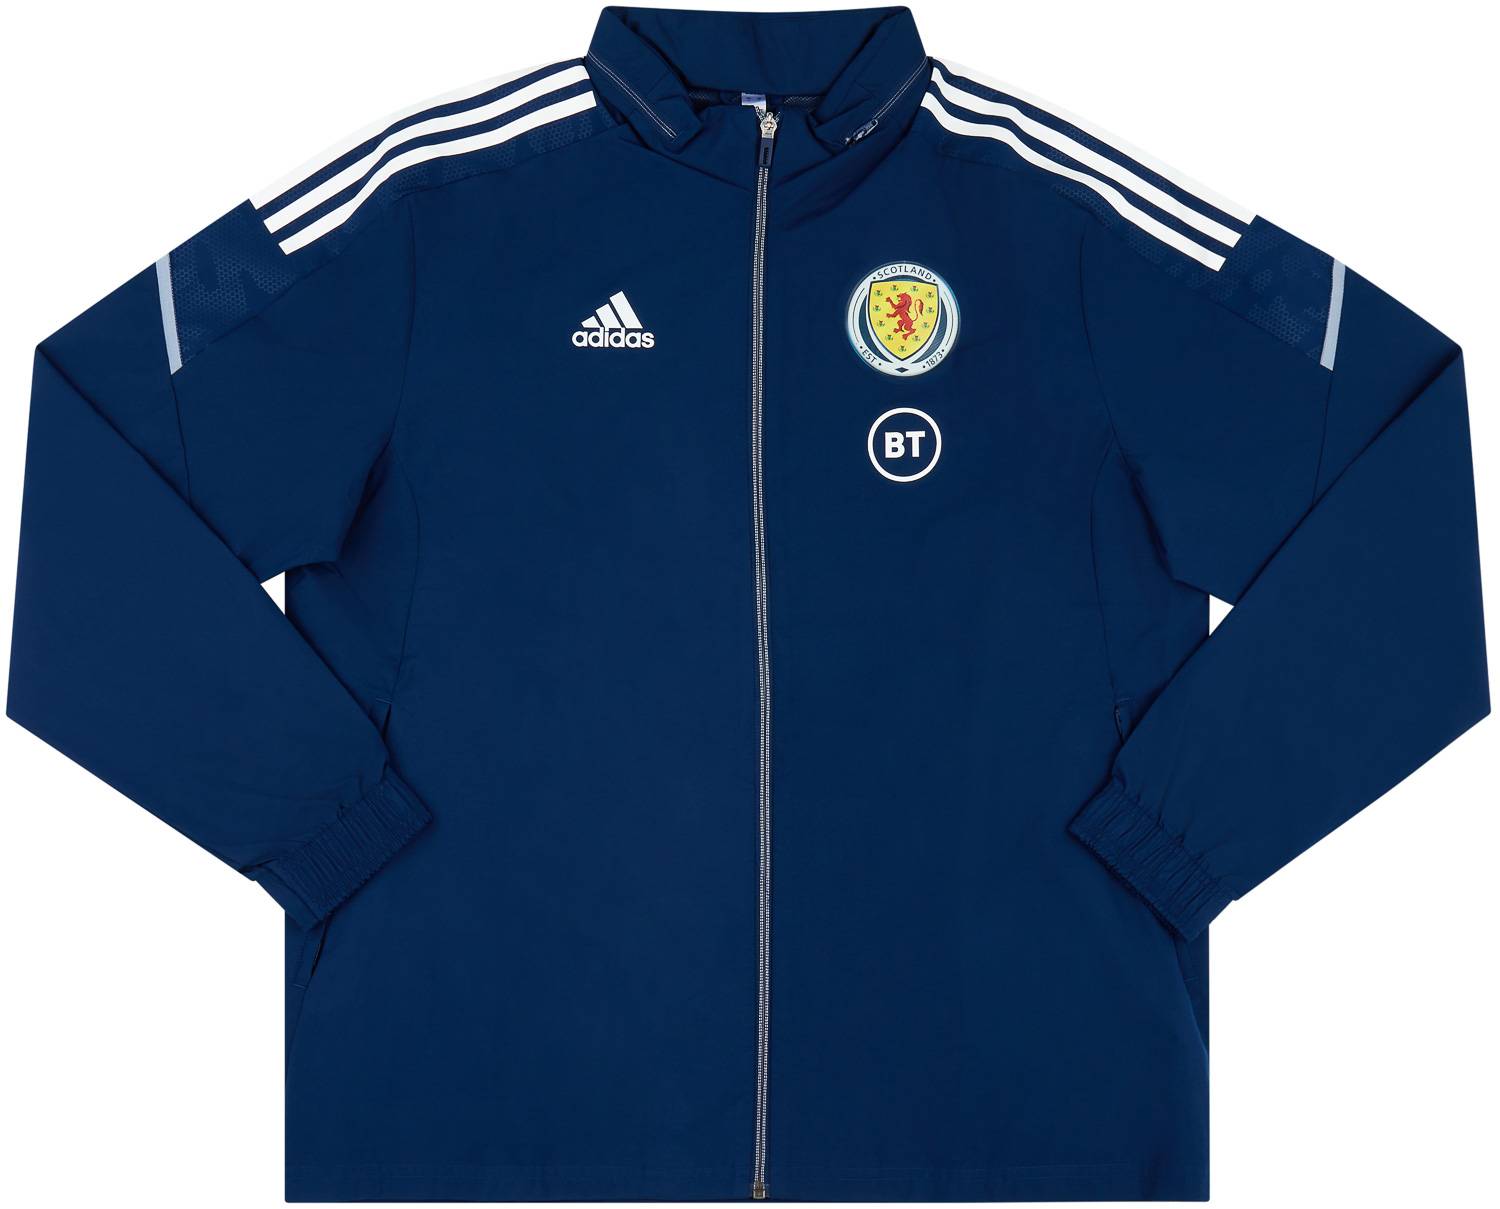 2021-22 Scotland Player Issue All-Weather Jacket